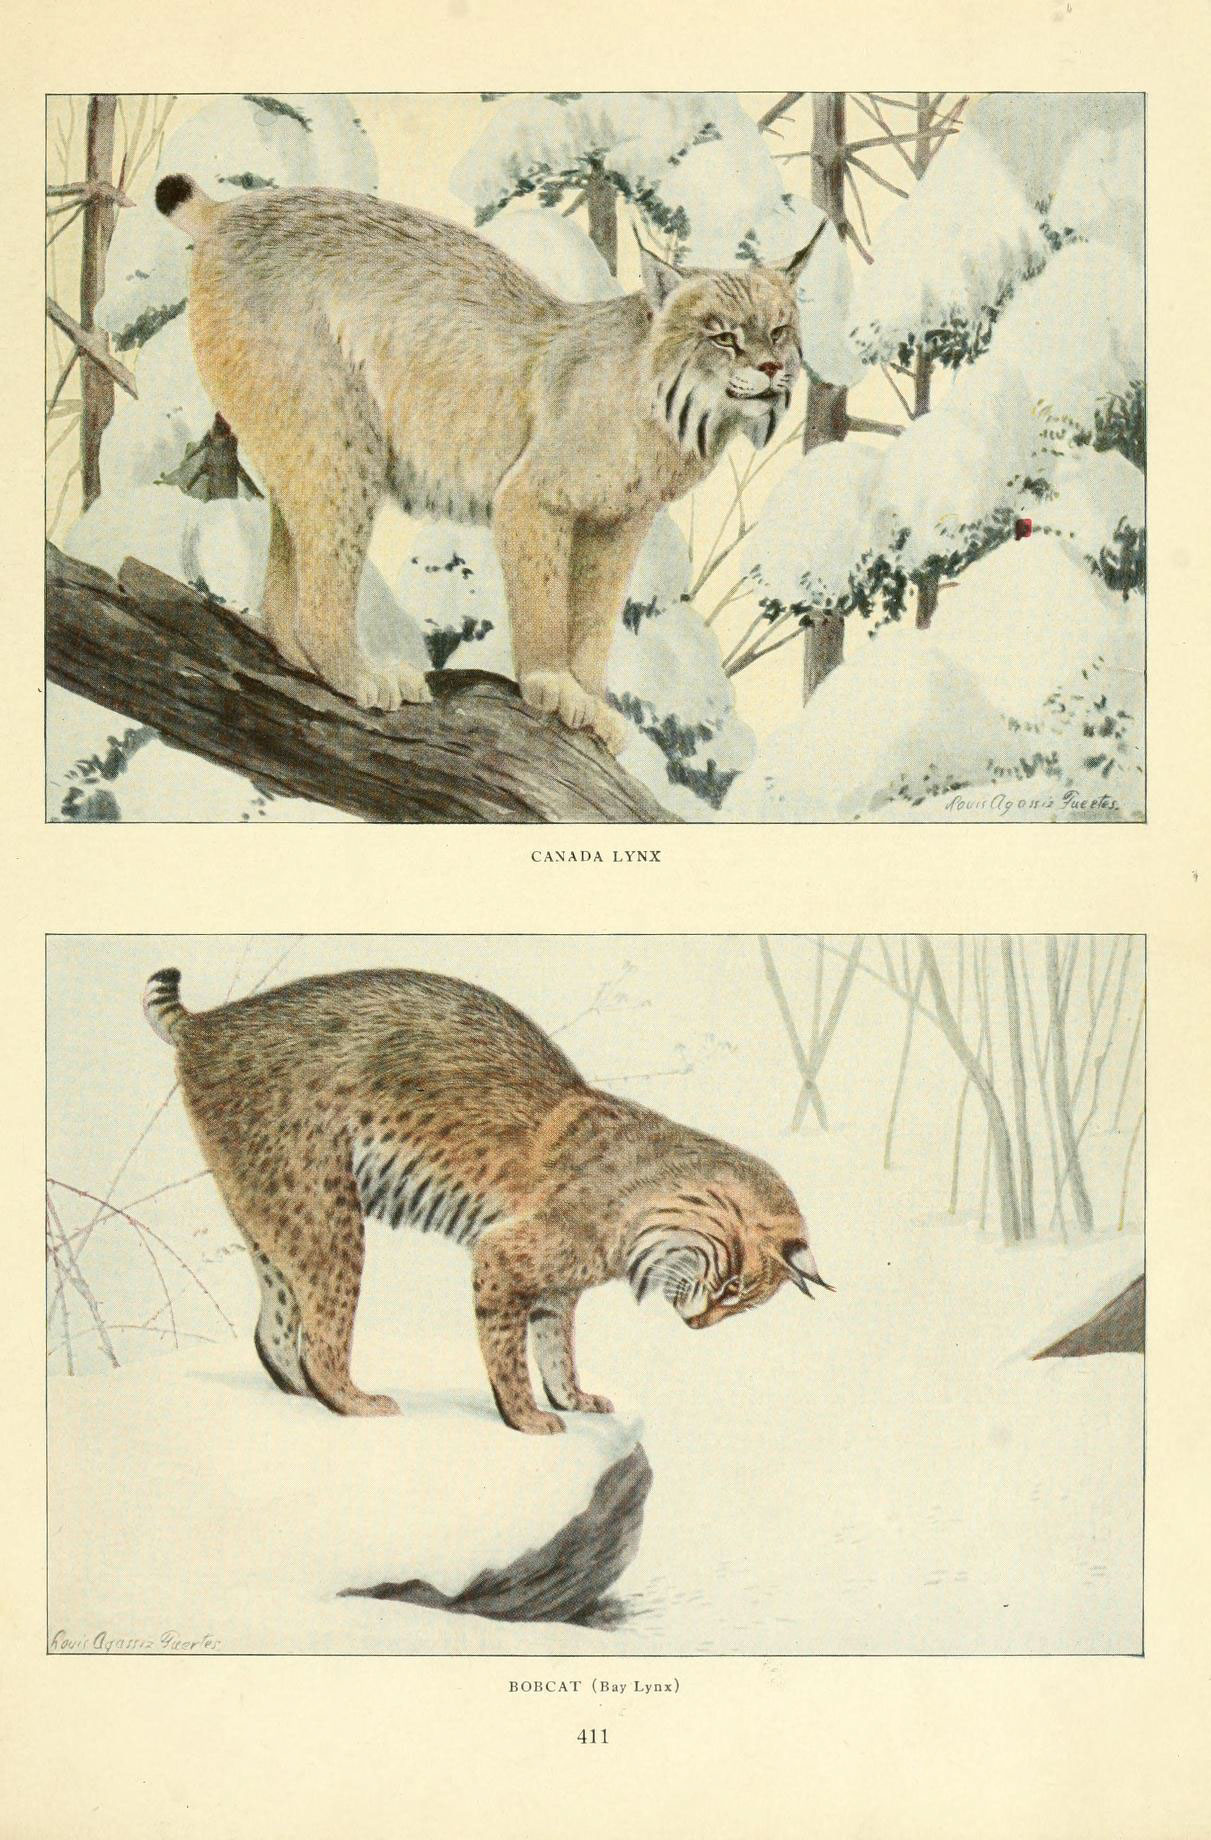 a lynx and a lynx are depicted in this vintage illustration